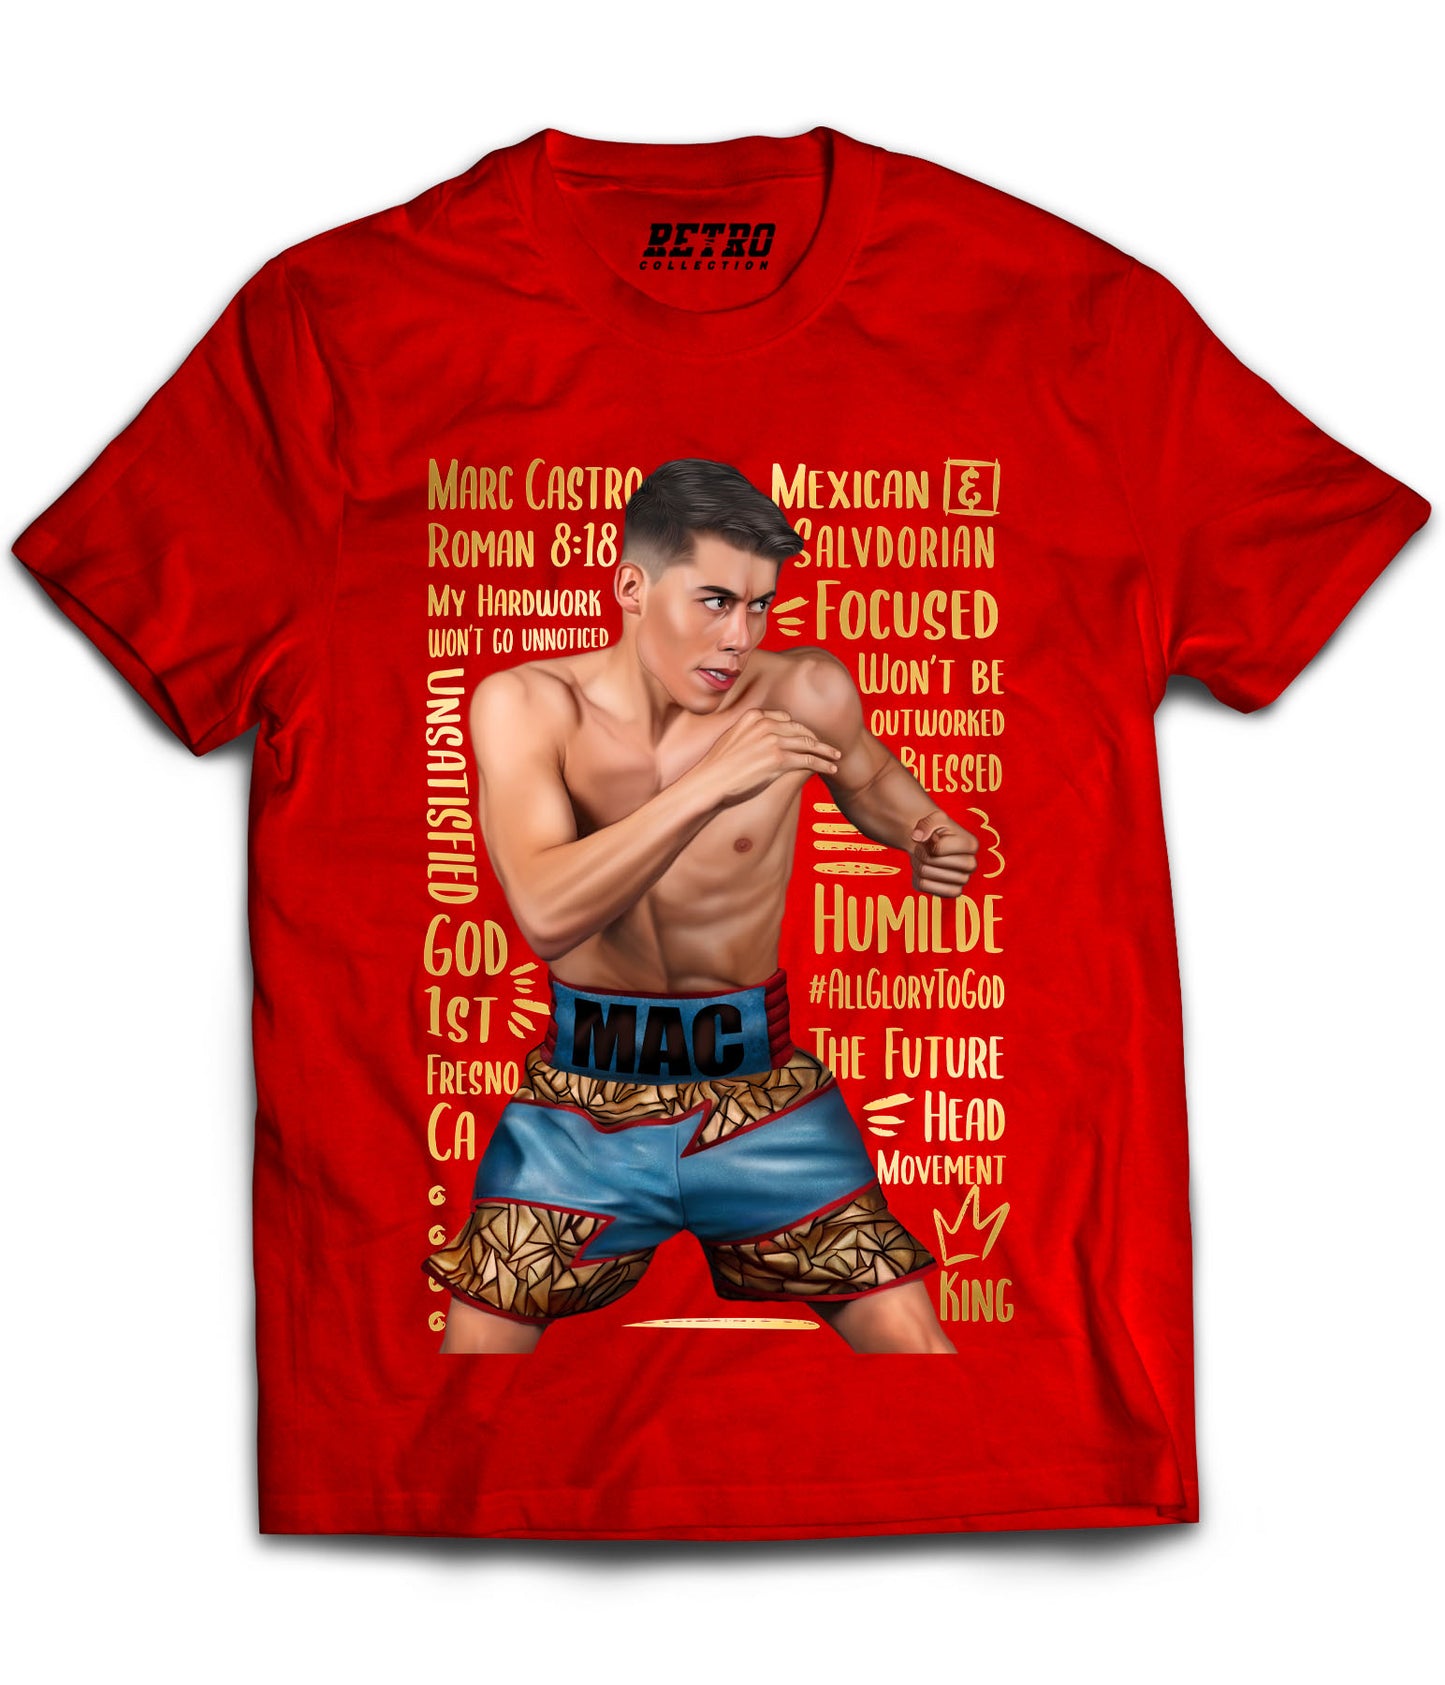 Marc Castro "Gold" Tribute Shirt *LIMITED EDITION* (Black, Gray, Red, White)